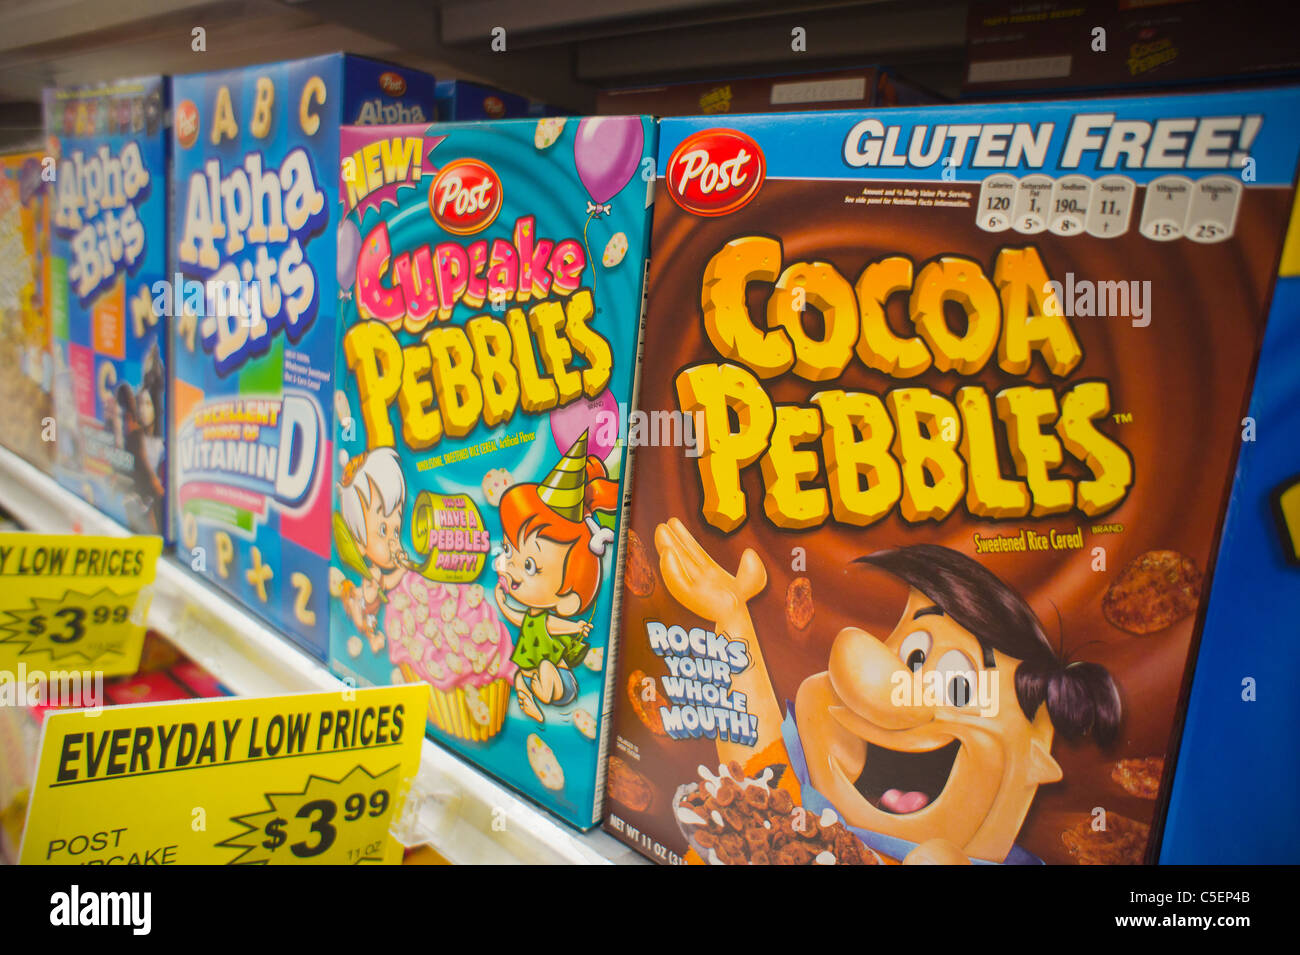 Boxes of Post breakfast cereal featuring cartoon characters on supermarket shelves in New York Stock Photo